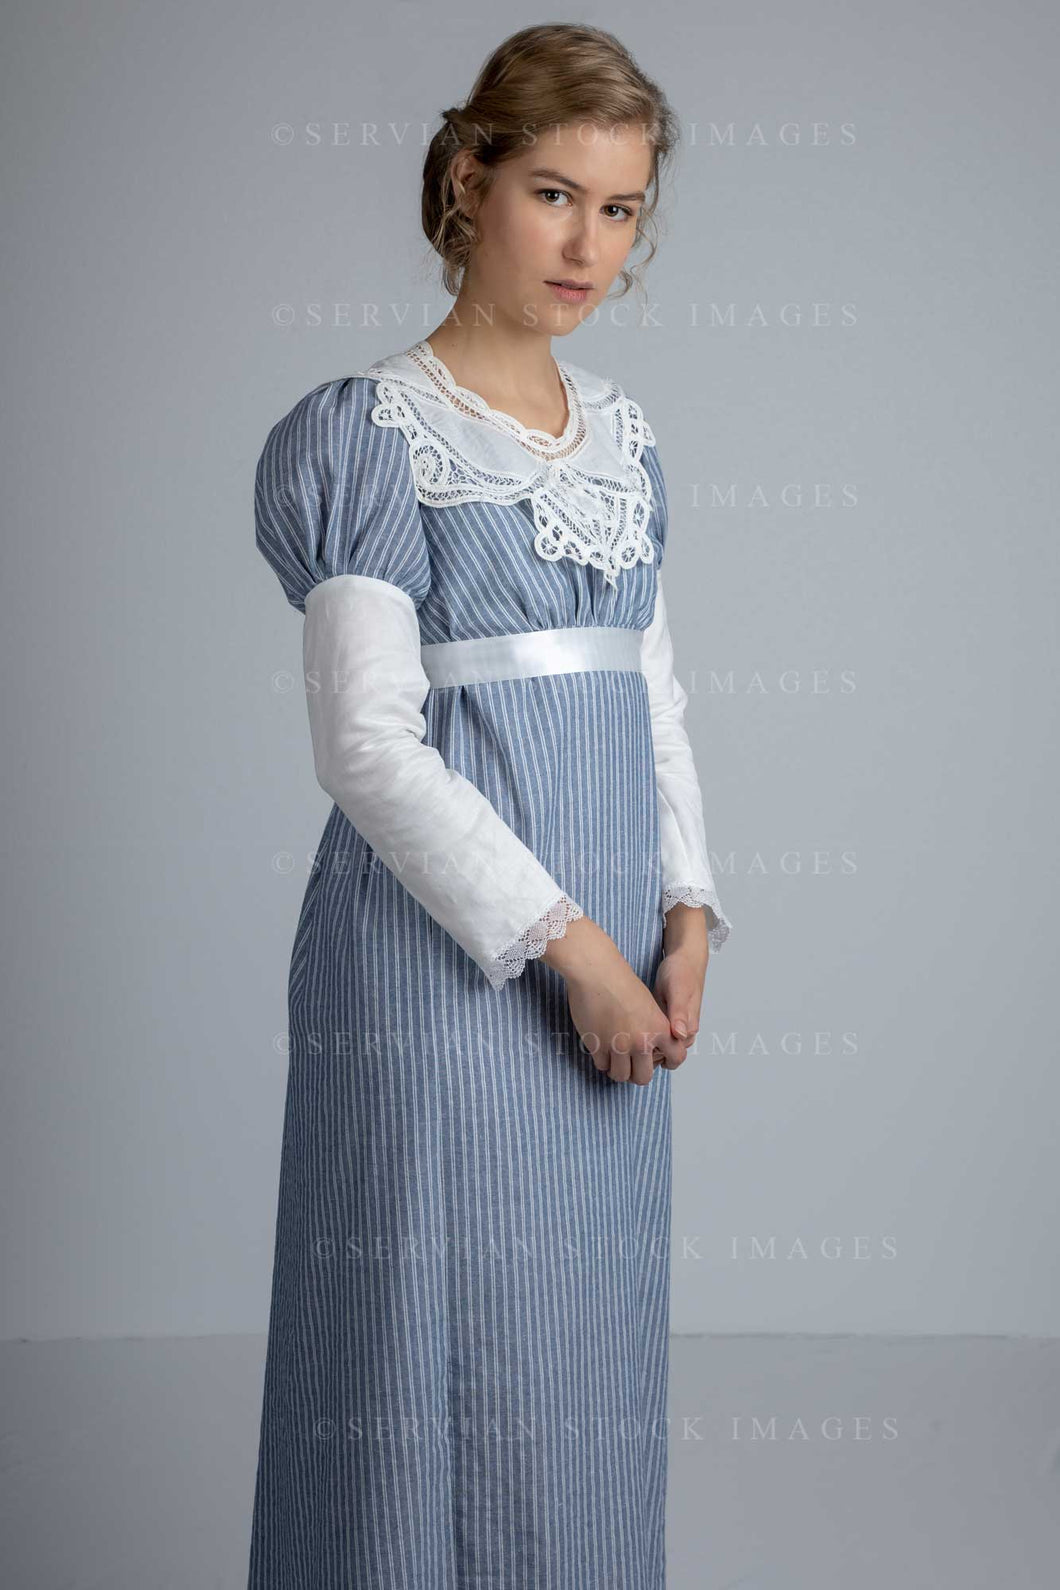 Regency woman in a striped cotton dress with a lace collar (Amalia 0601)